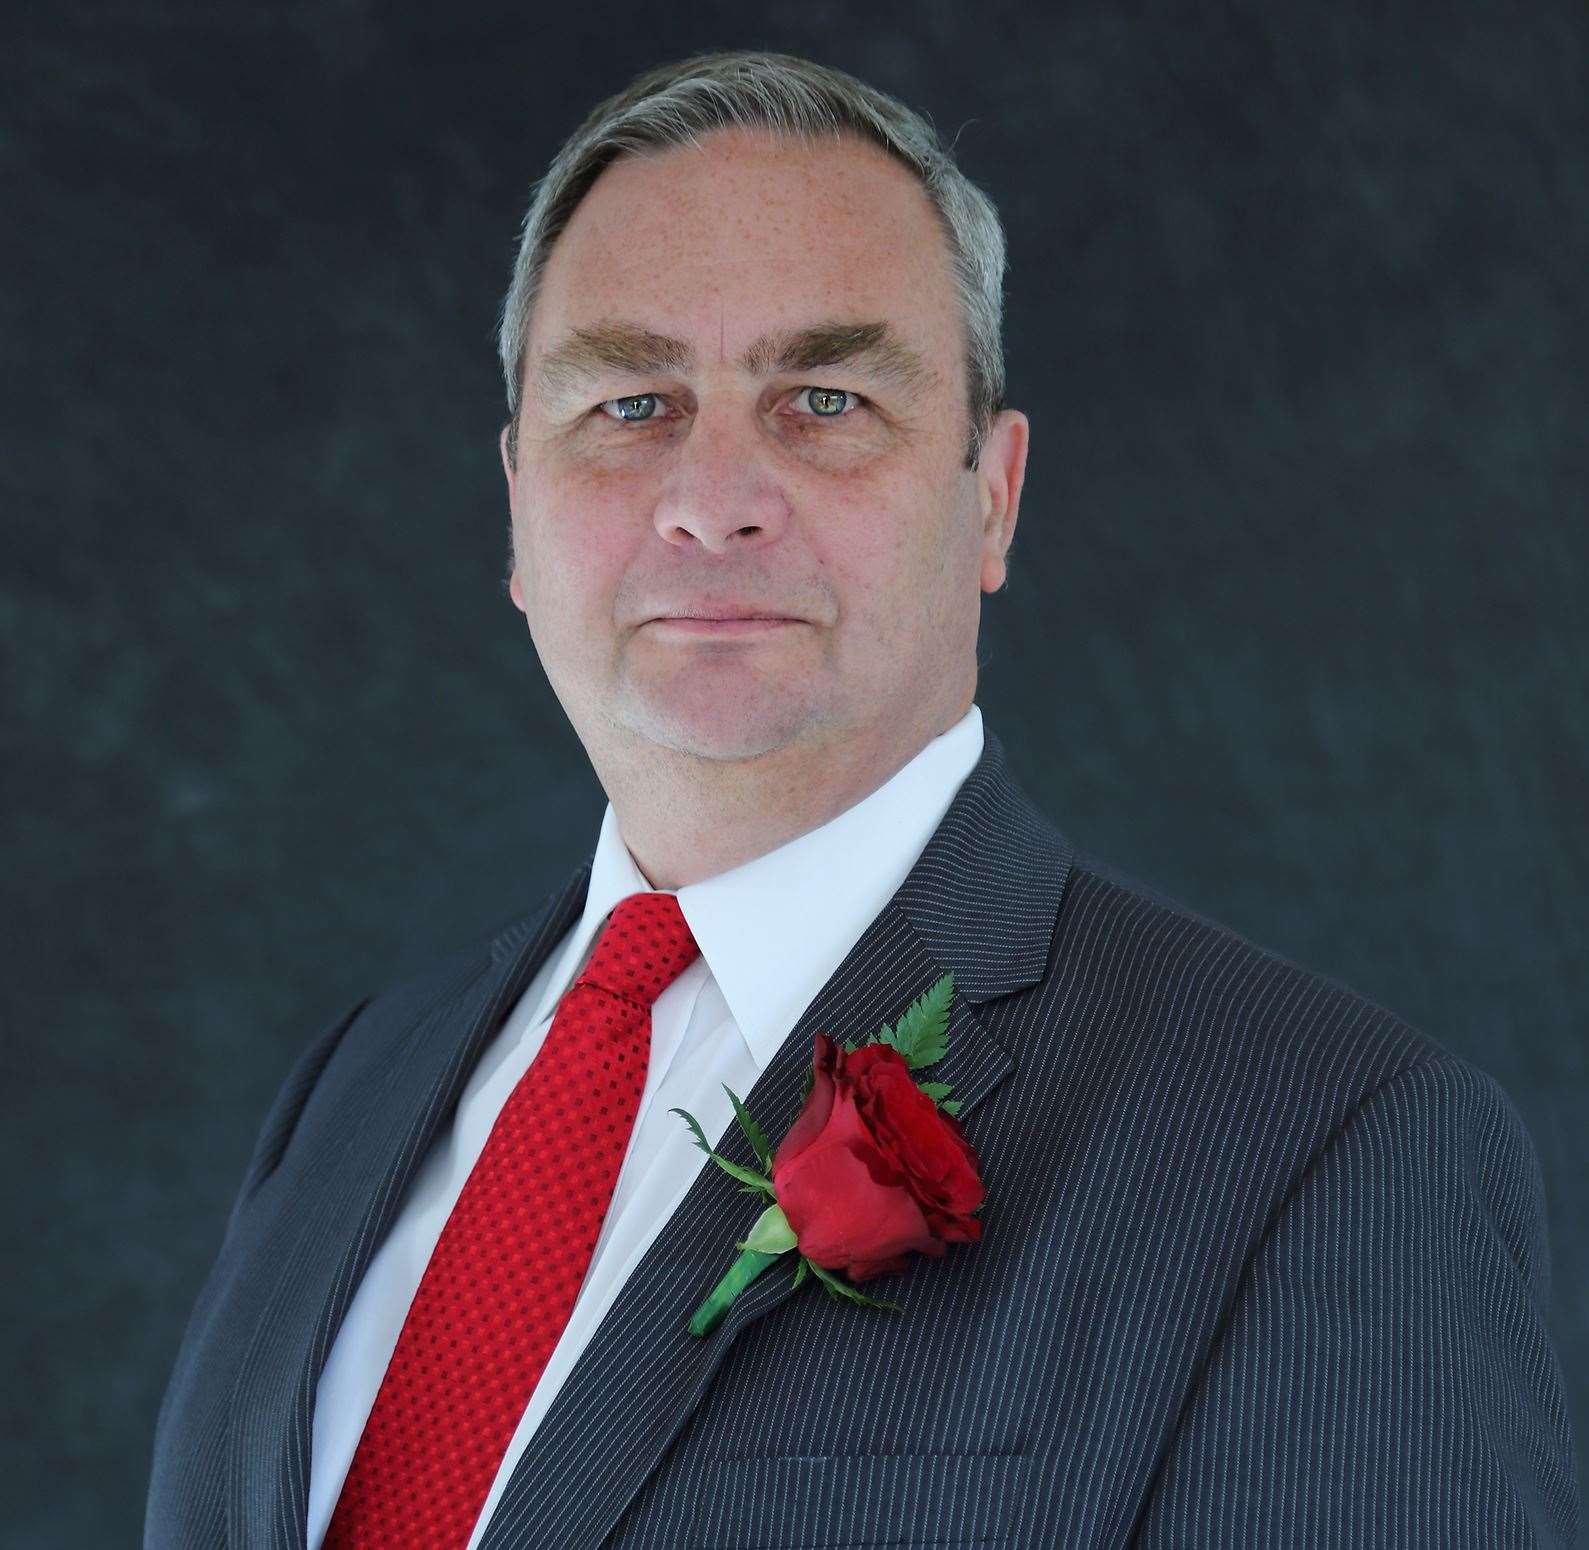 Cllr John Burden said the month ahead would be challenging for local residents and businesses.